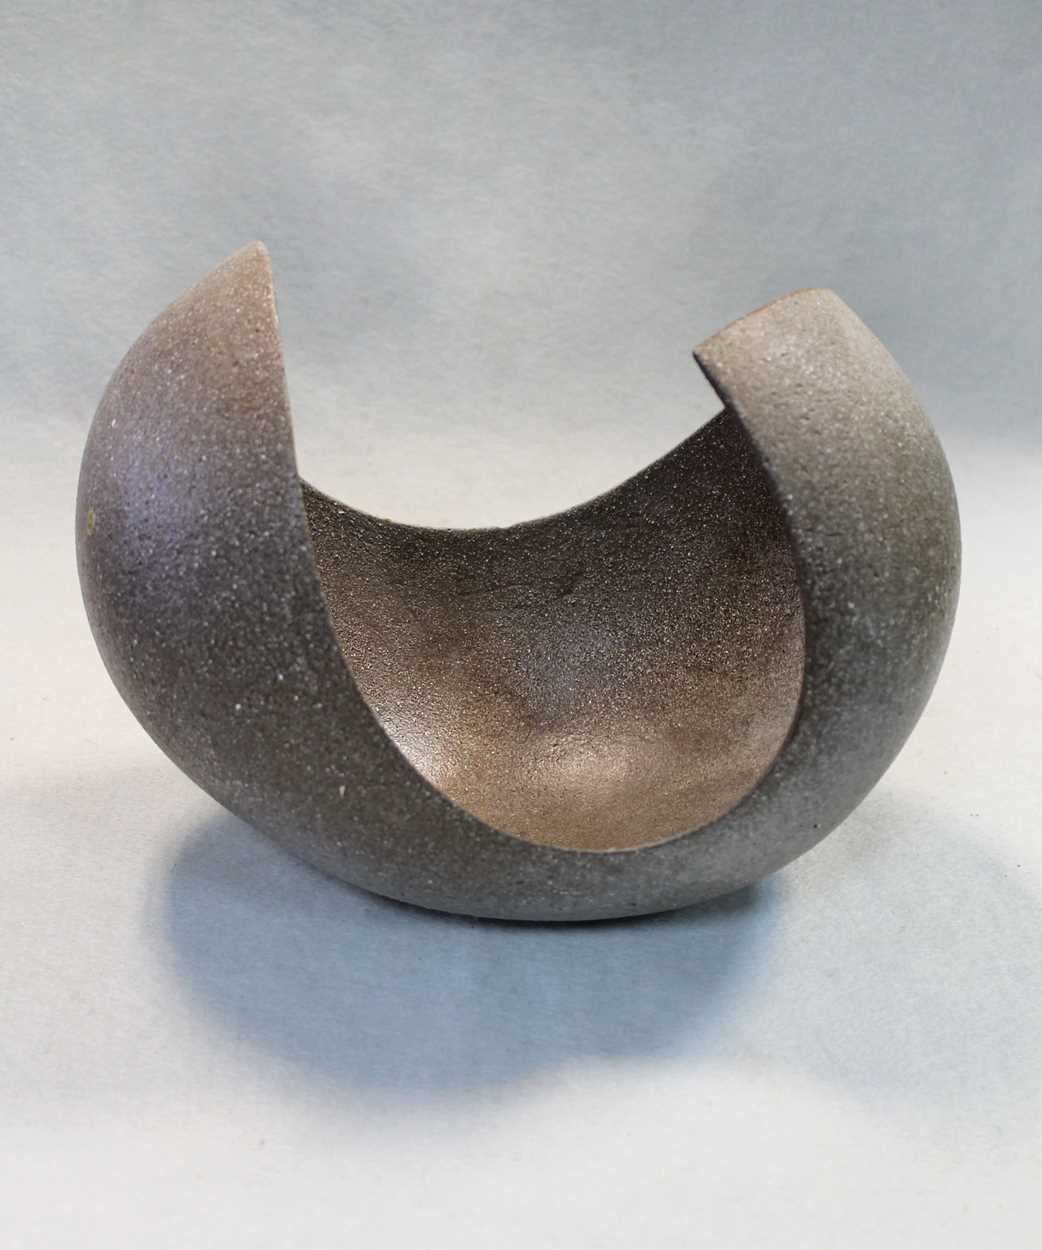 § Peter Fluck (British, born 1941), abstract stoneware bowl, 2005, - Image 5 of 6